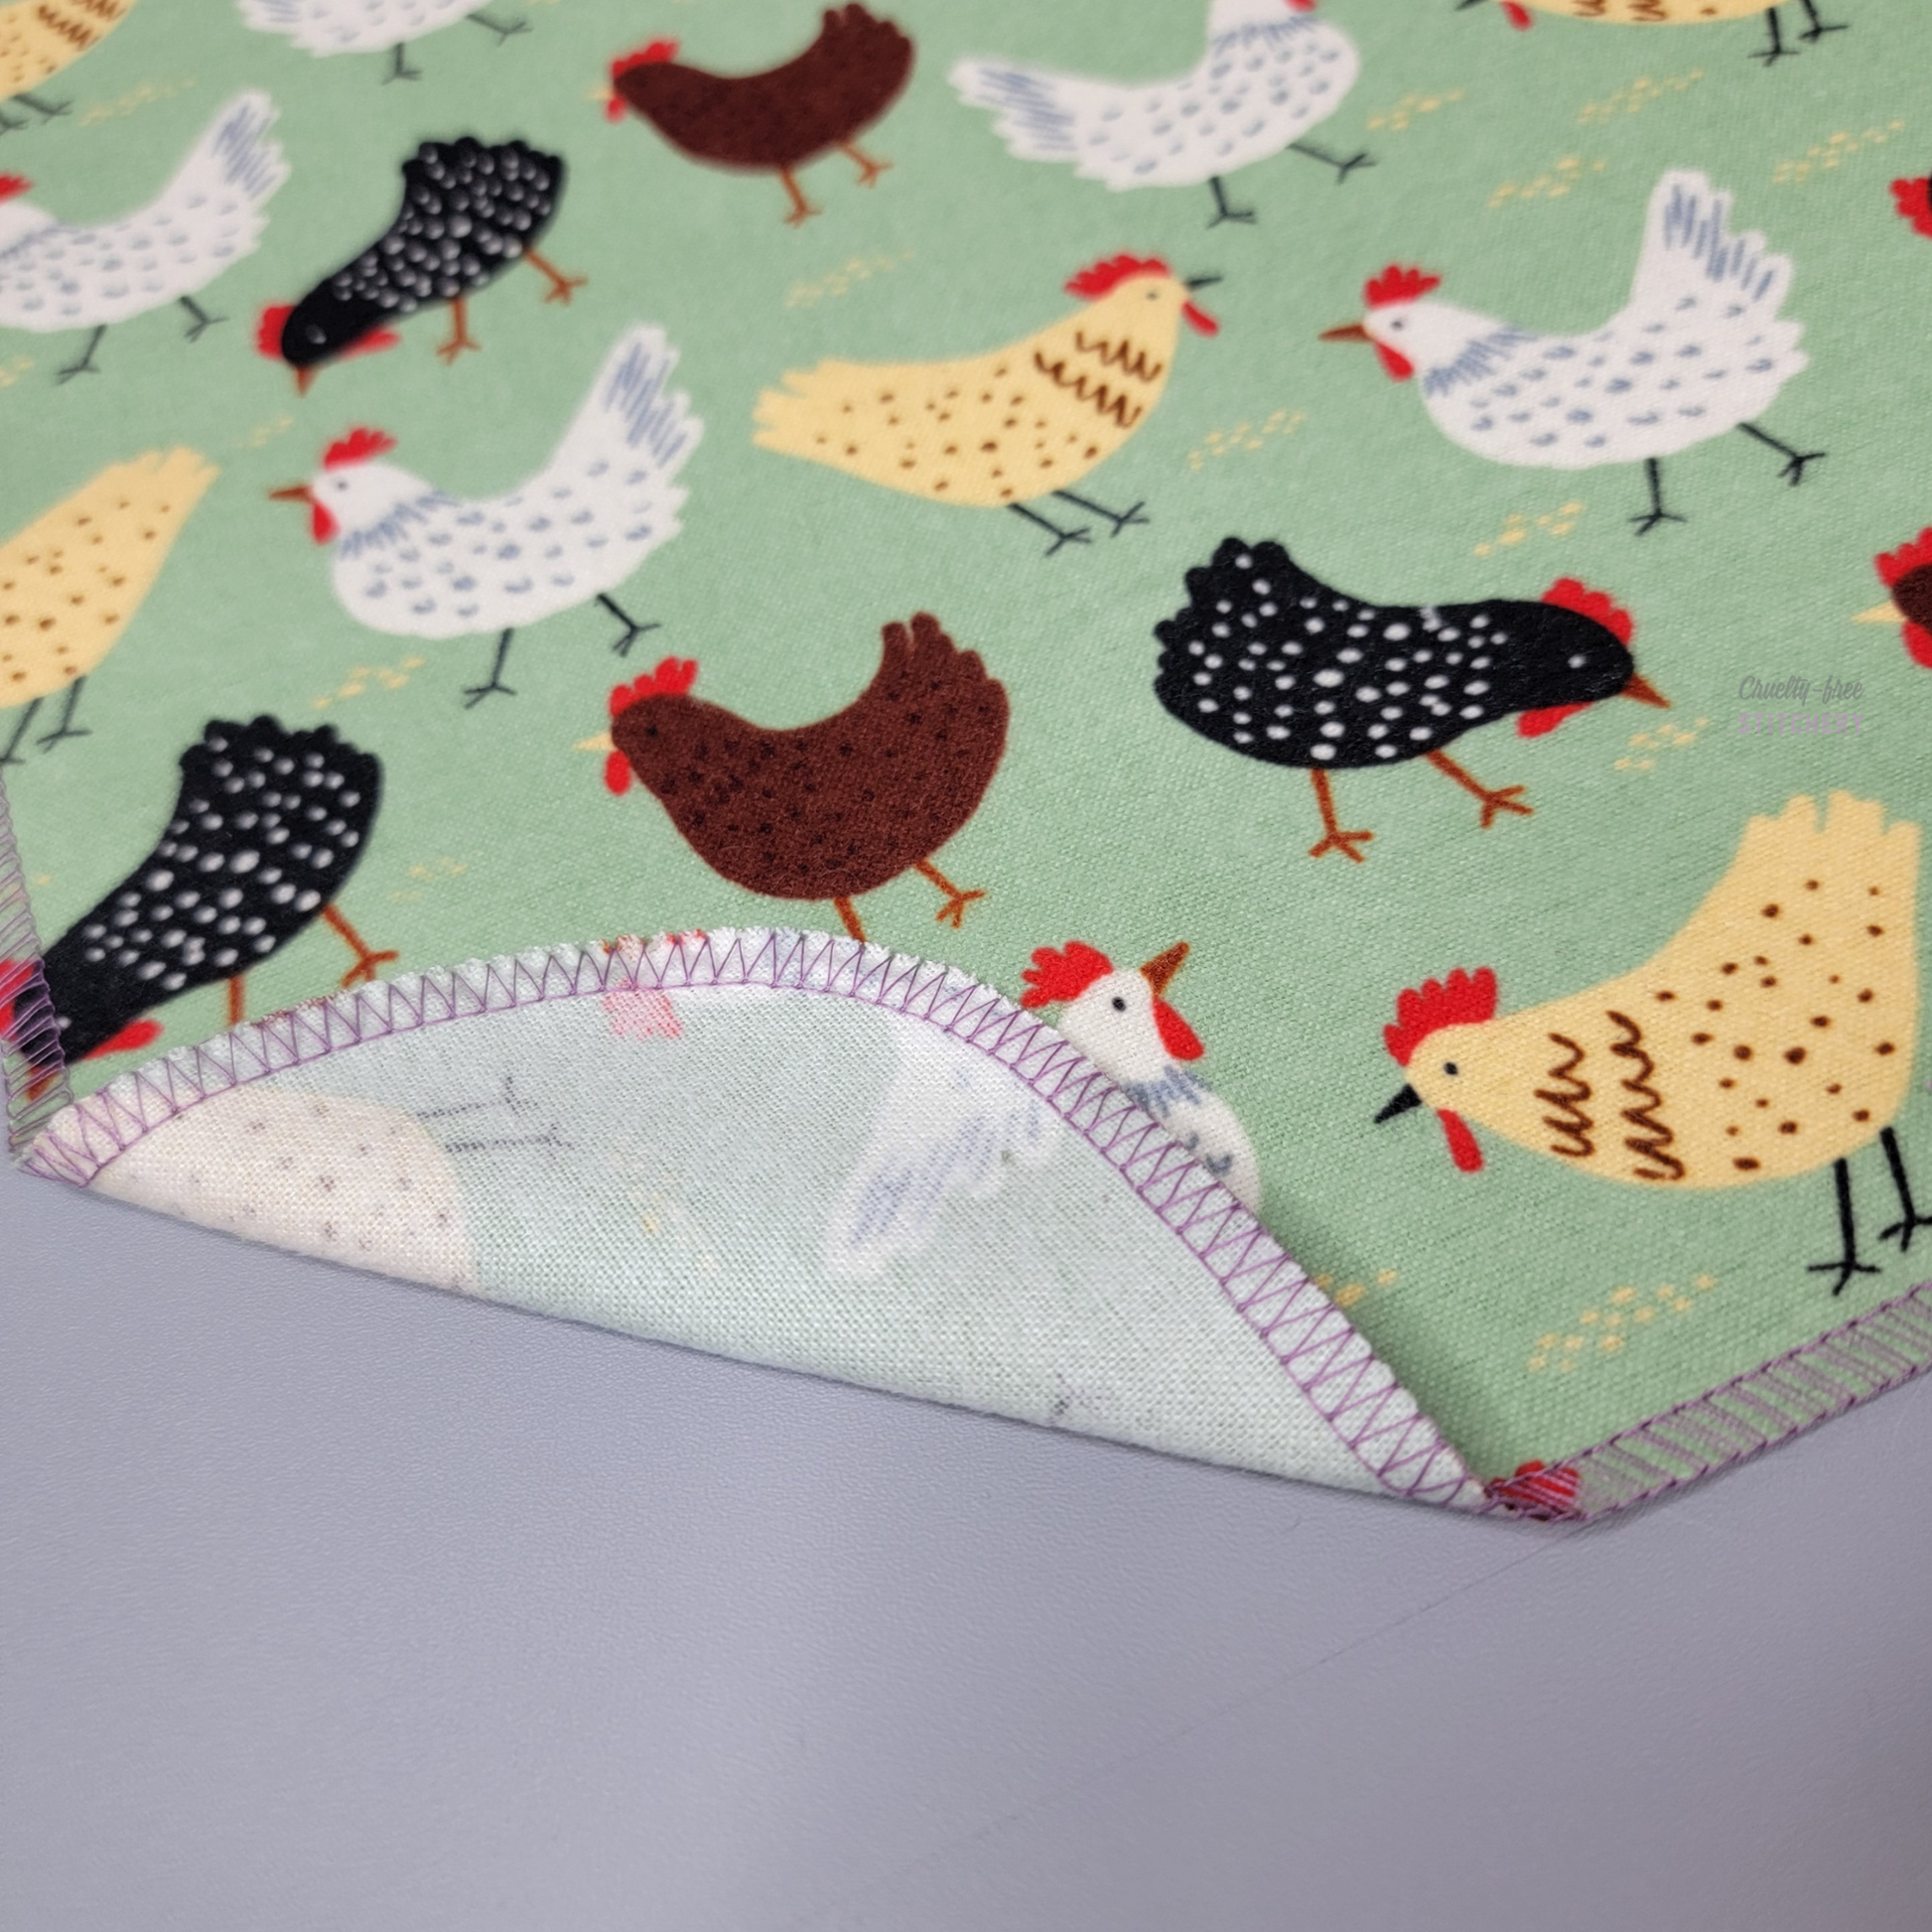 The corner of the green with chickens print NonPaper Towel with the edge folded up to show the back, which is unprinted white. 